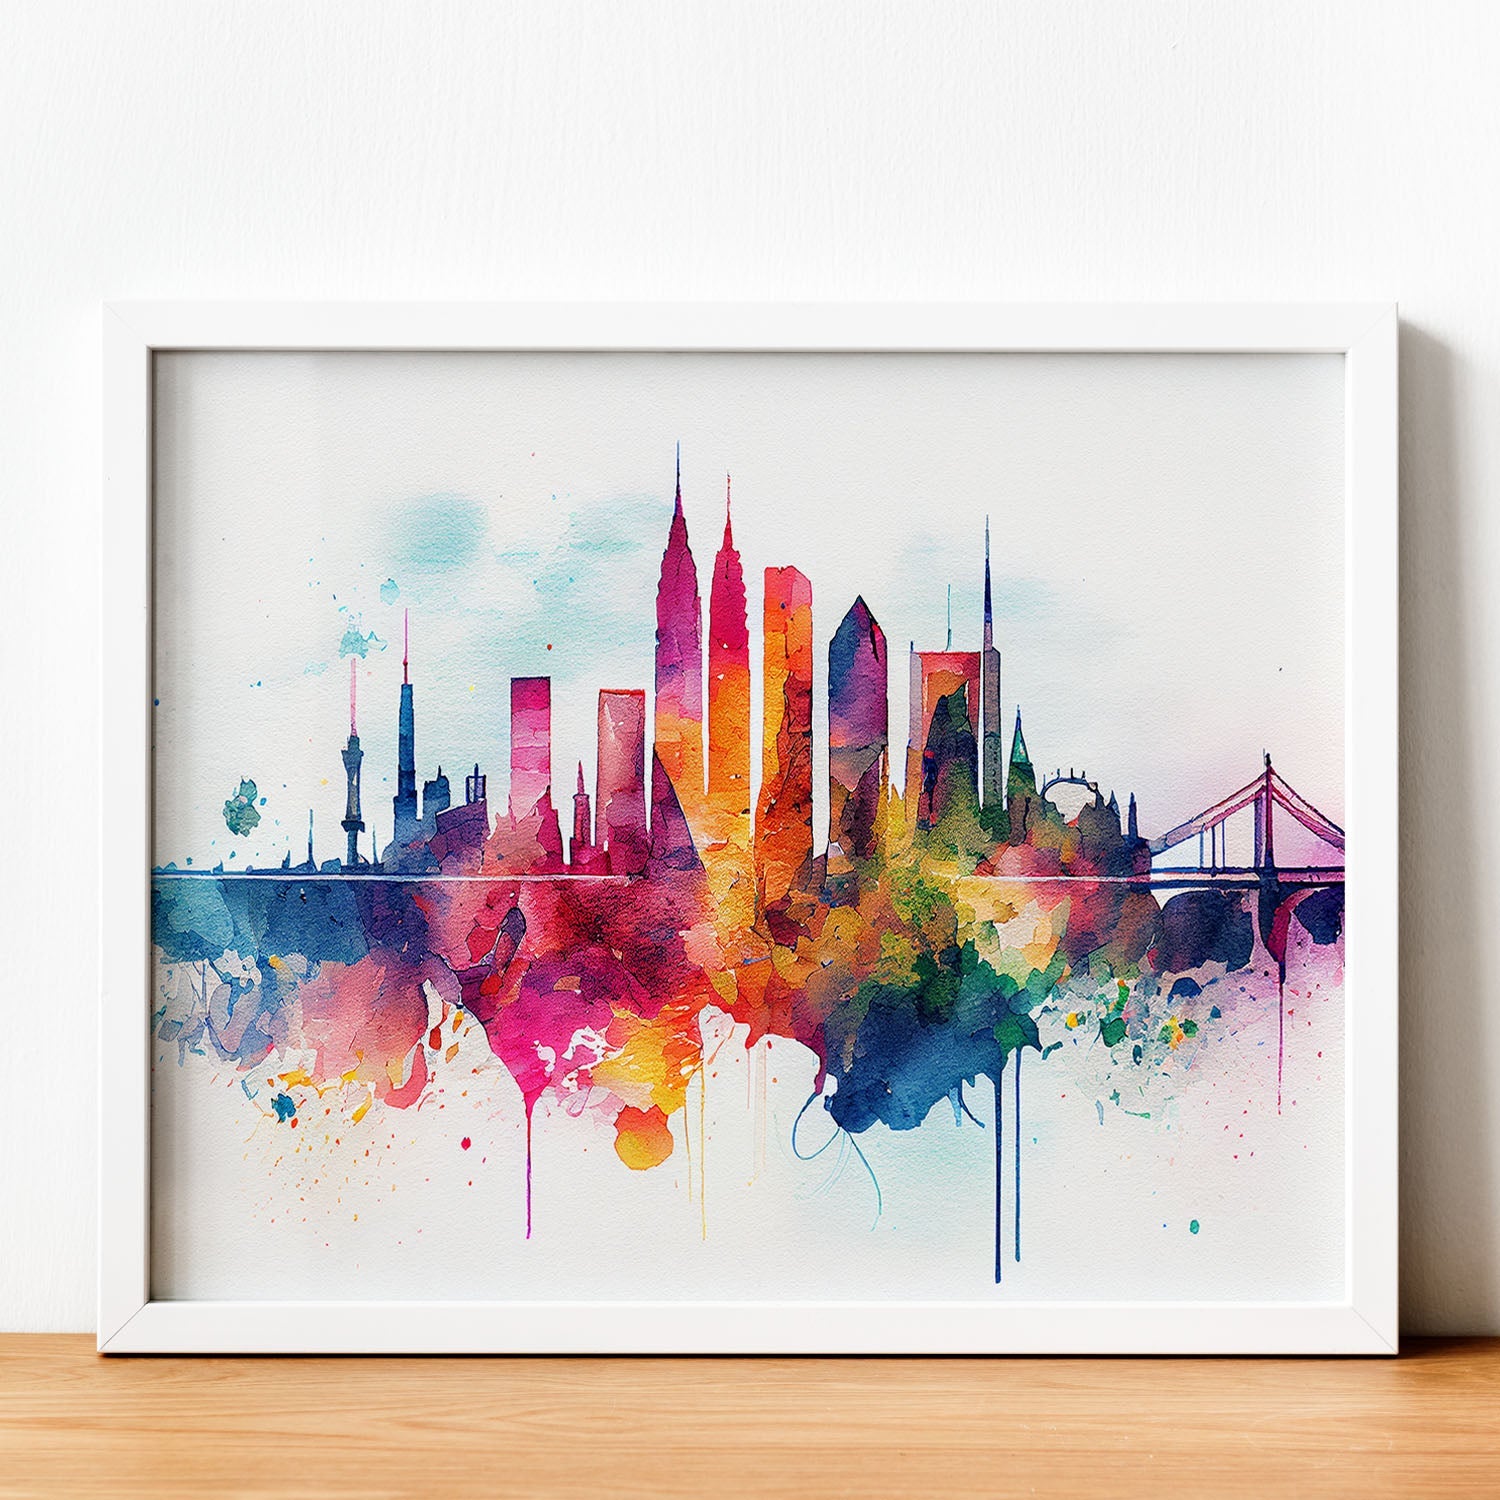 Nacnic watercolor of a skyline of the city of Frankfurt. Aesthetic Wall Art Prints for Bedroom or Living Room Design.-Artwork-Nacnic-A4-Sin Marco-Nacnic Estudio SL